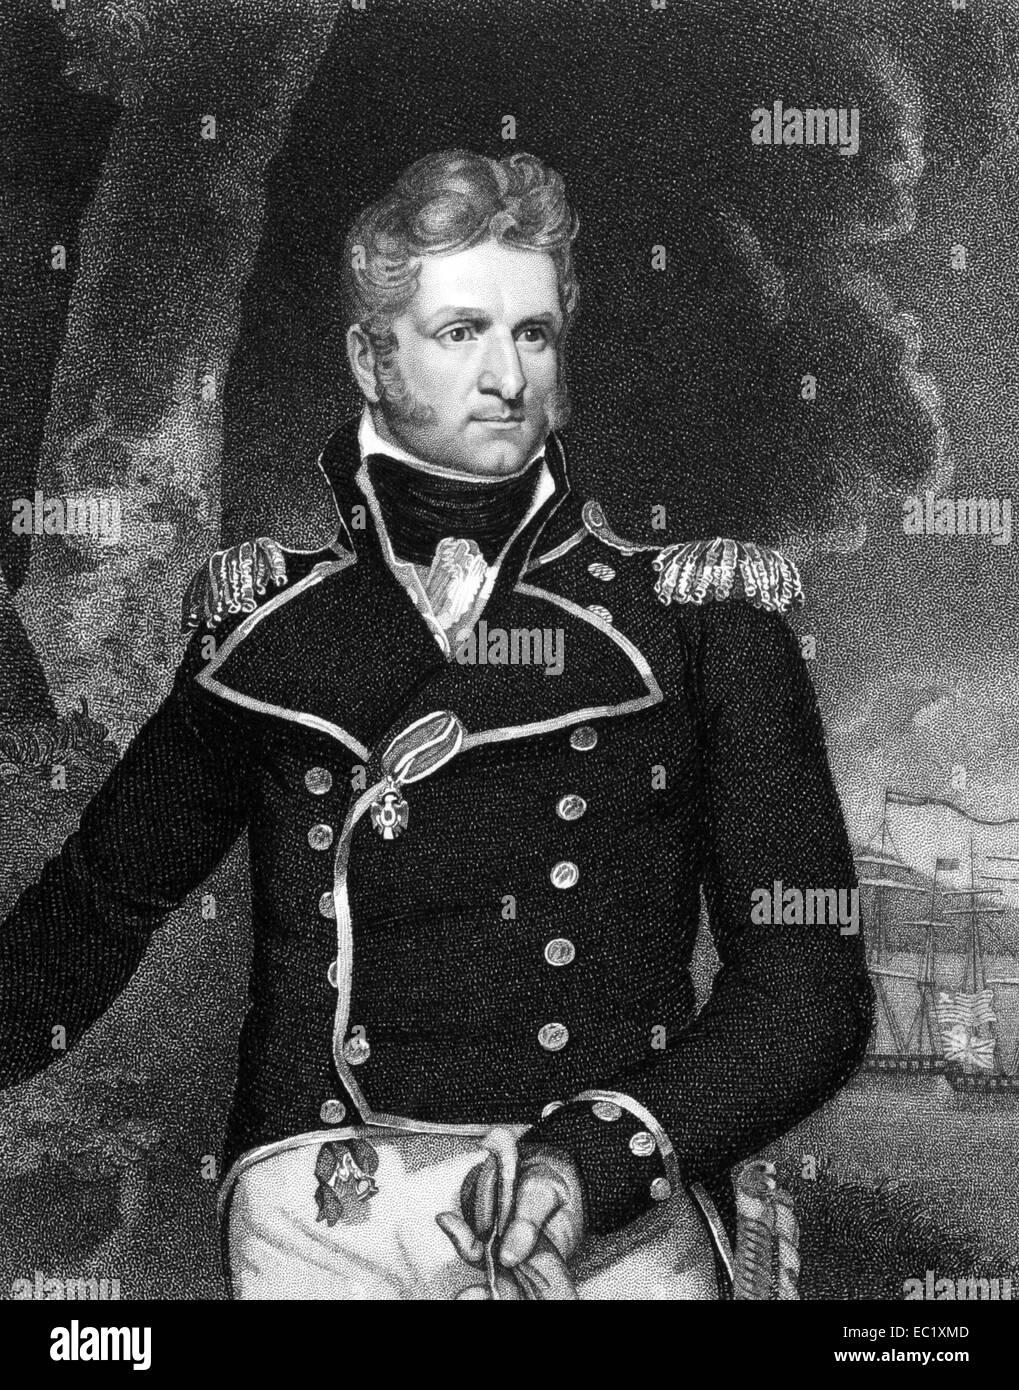 Thomas Macdonough (1783-1825) on engraving from 1834. American naval officer. Stock Photo